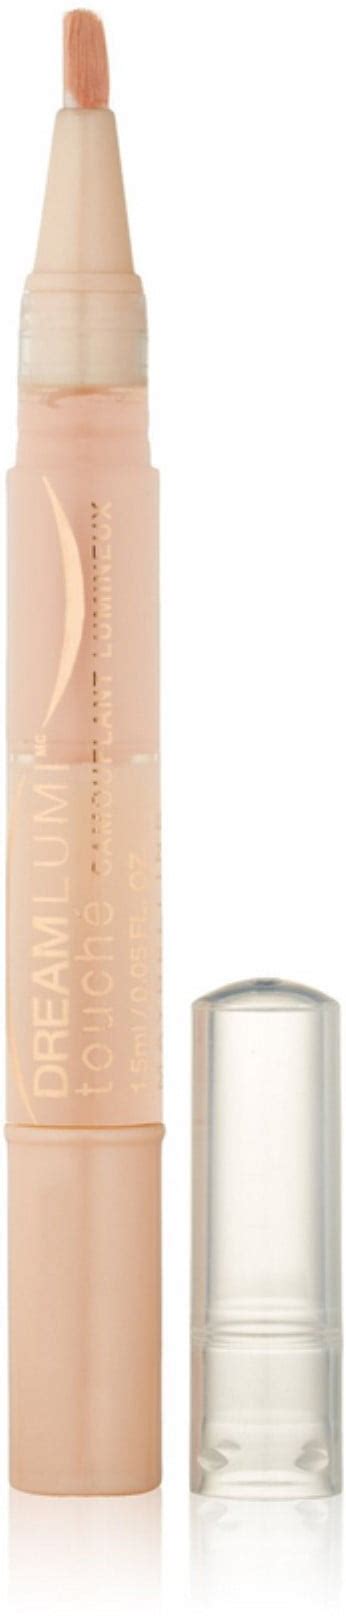 Maybelline Dream Lumi Touch Highlighting Concealer Radiant 310 0 05